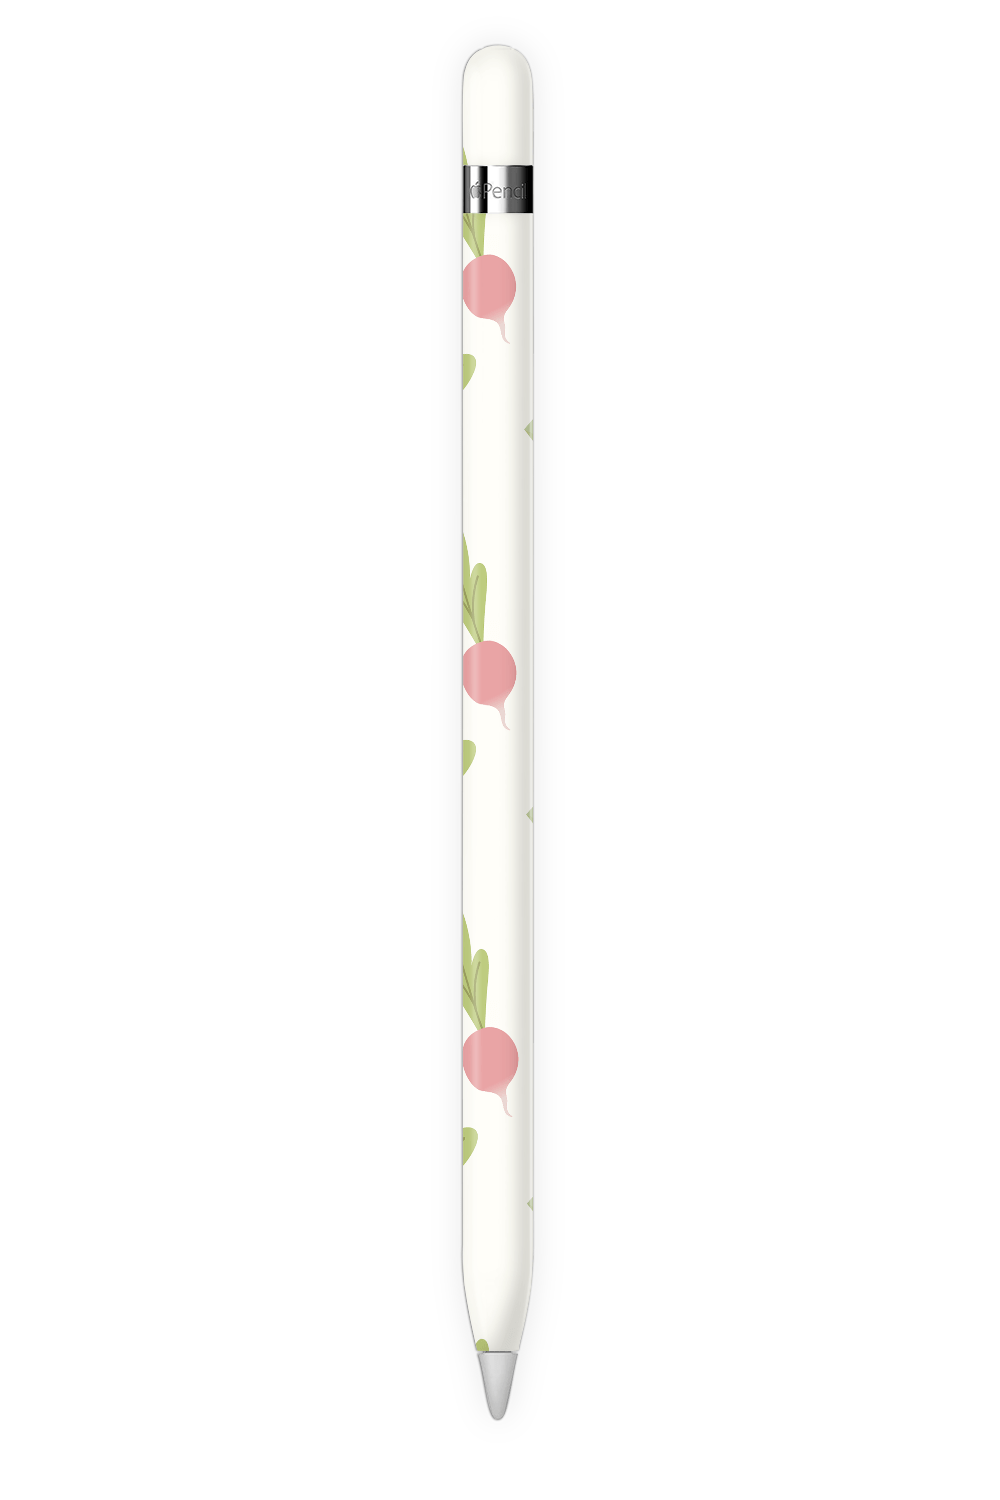 Budding Sprouts Apple Pencil Skins